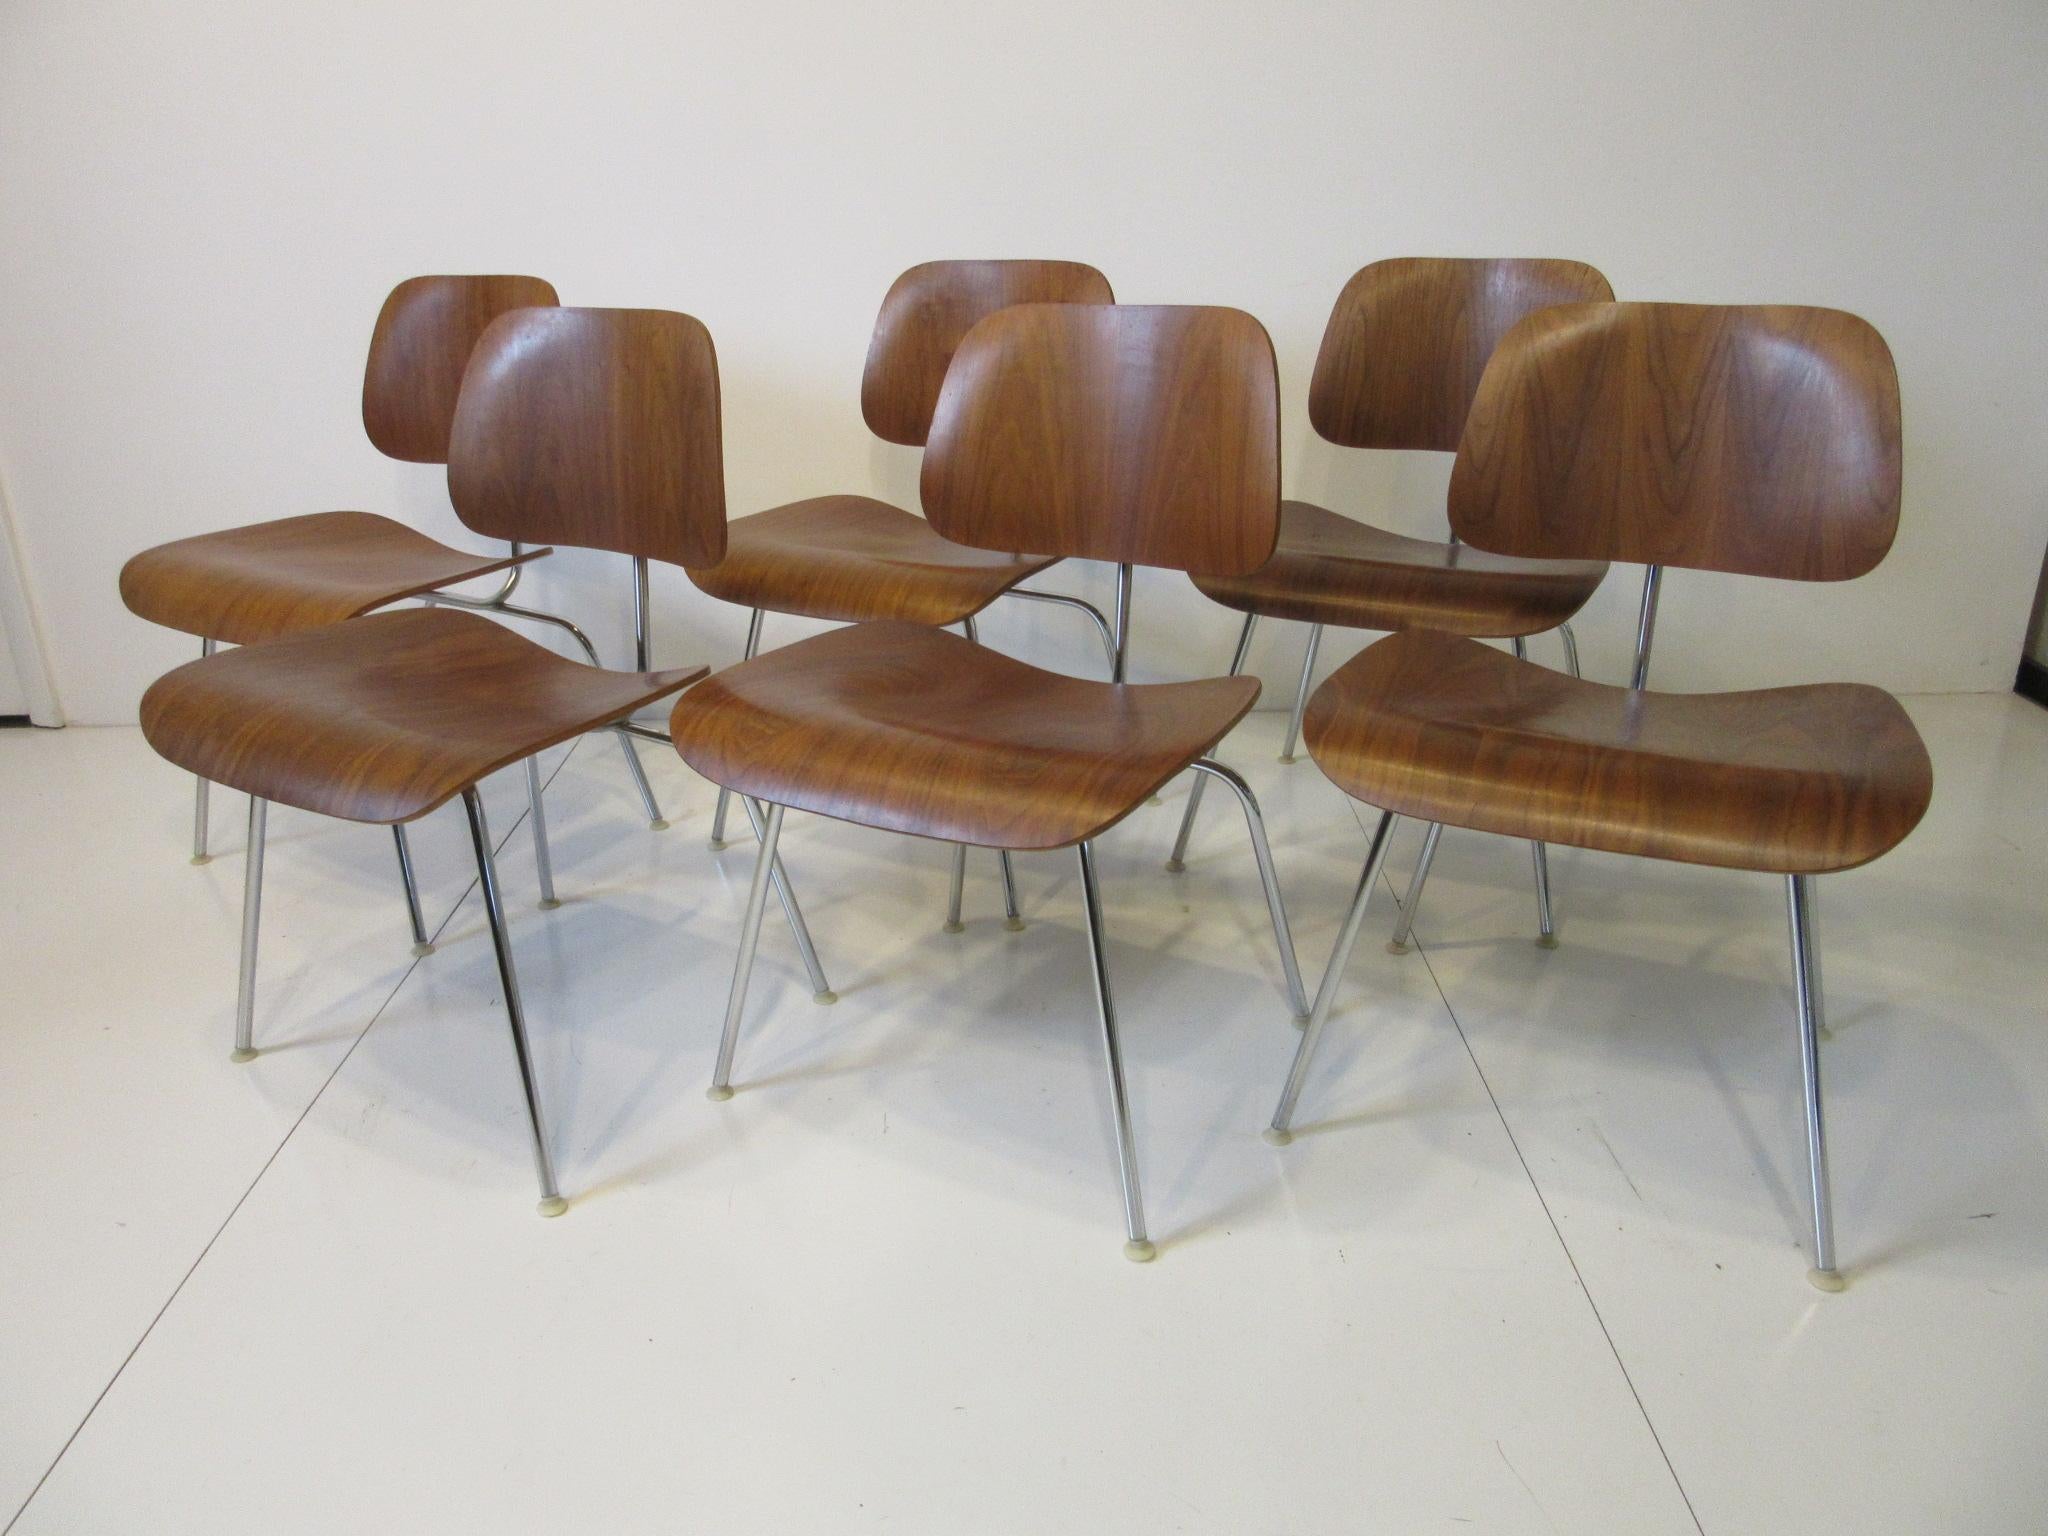 A set of six well grained walnut DCM dining chairs with chromed steel frames and white plastic adjustable feet some of the best grained wood we have seen in along time. All were purchased at the same time and have aged together as a matching set,